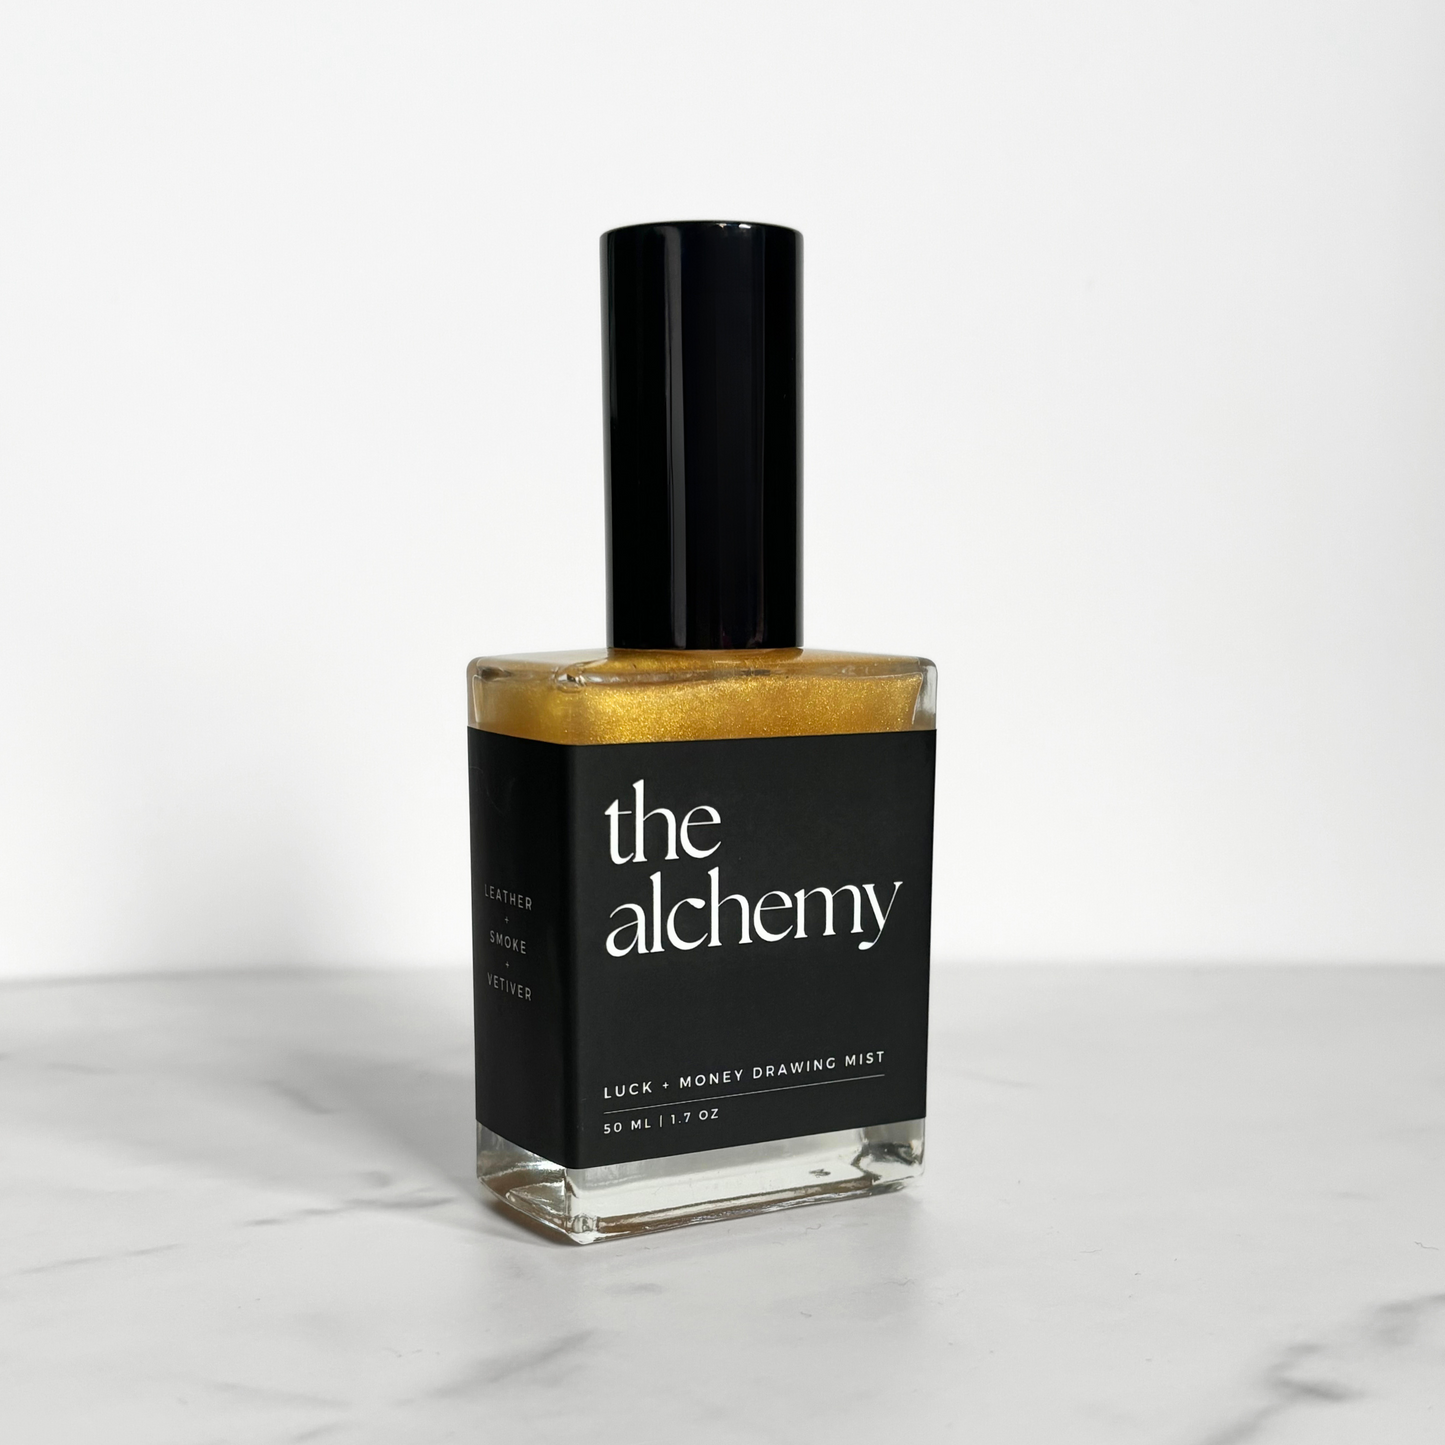 The Alchemy | Luck + Money Drawing Fragrance Mist